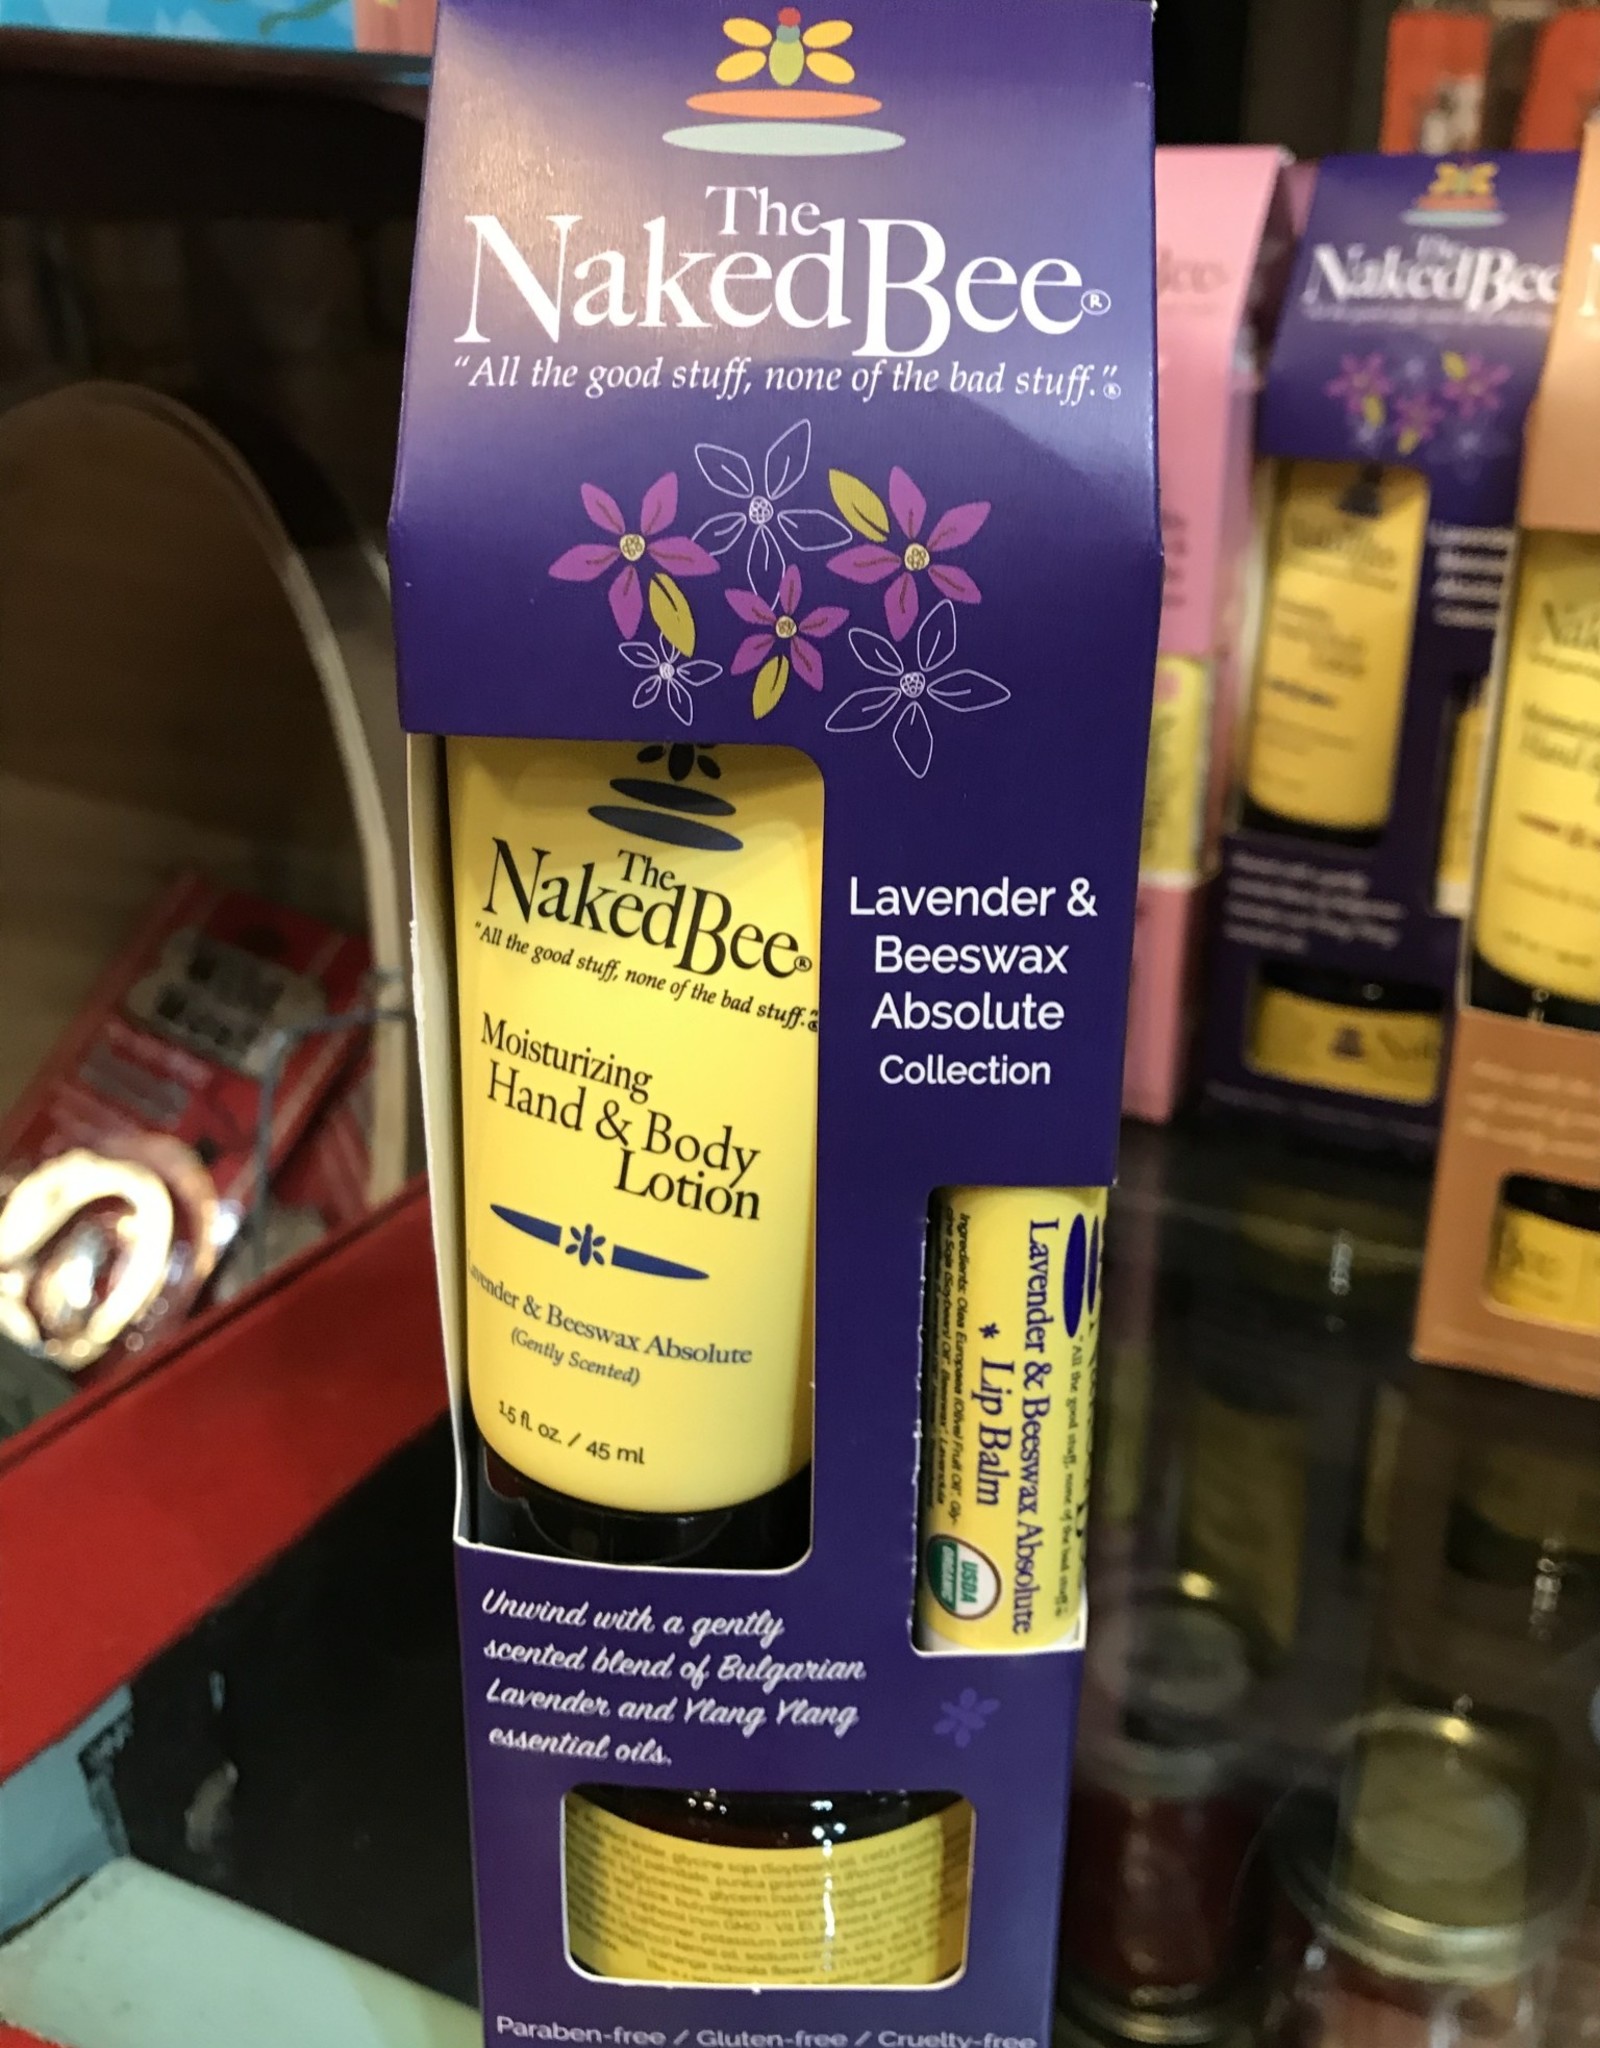 Naked Bee Gift Set - Lavender & Beeswax